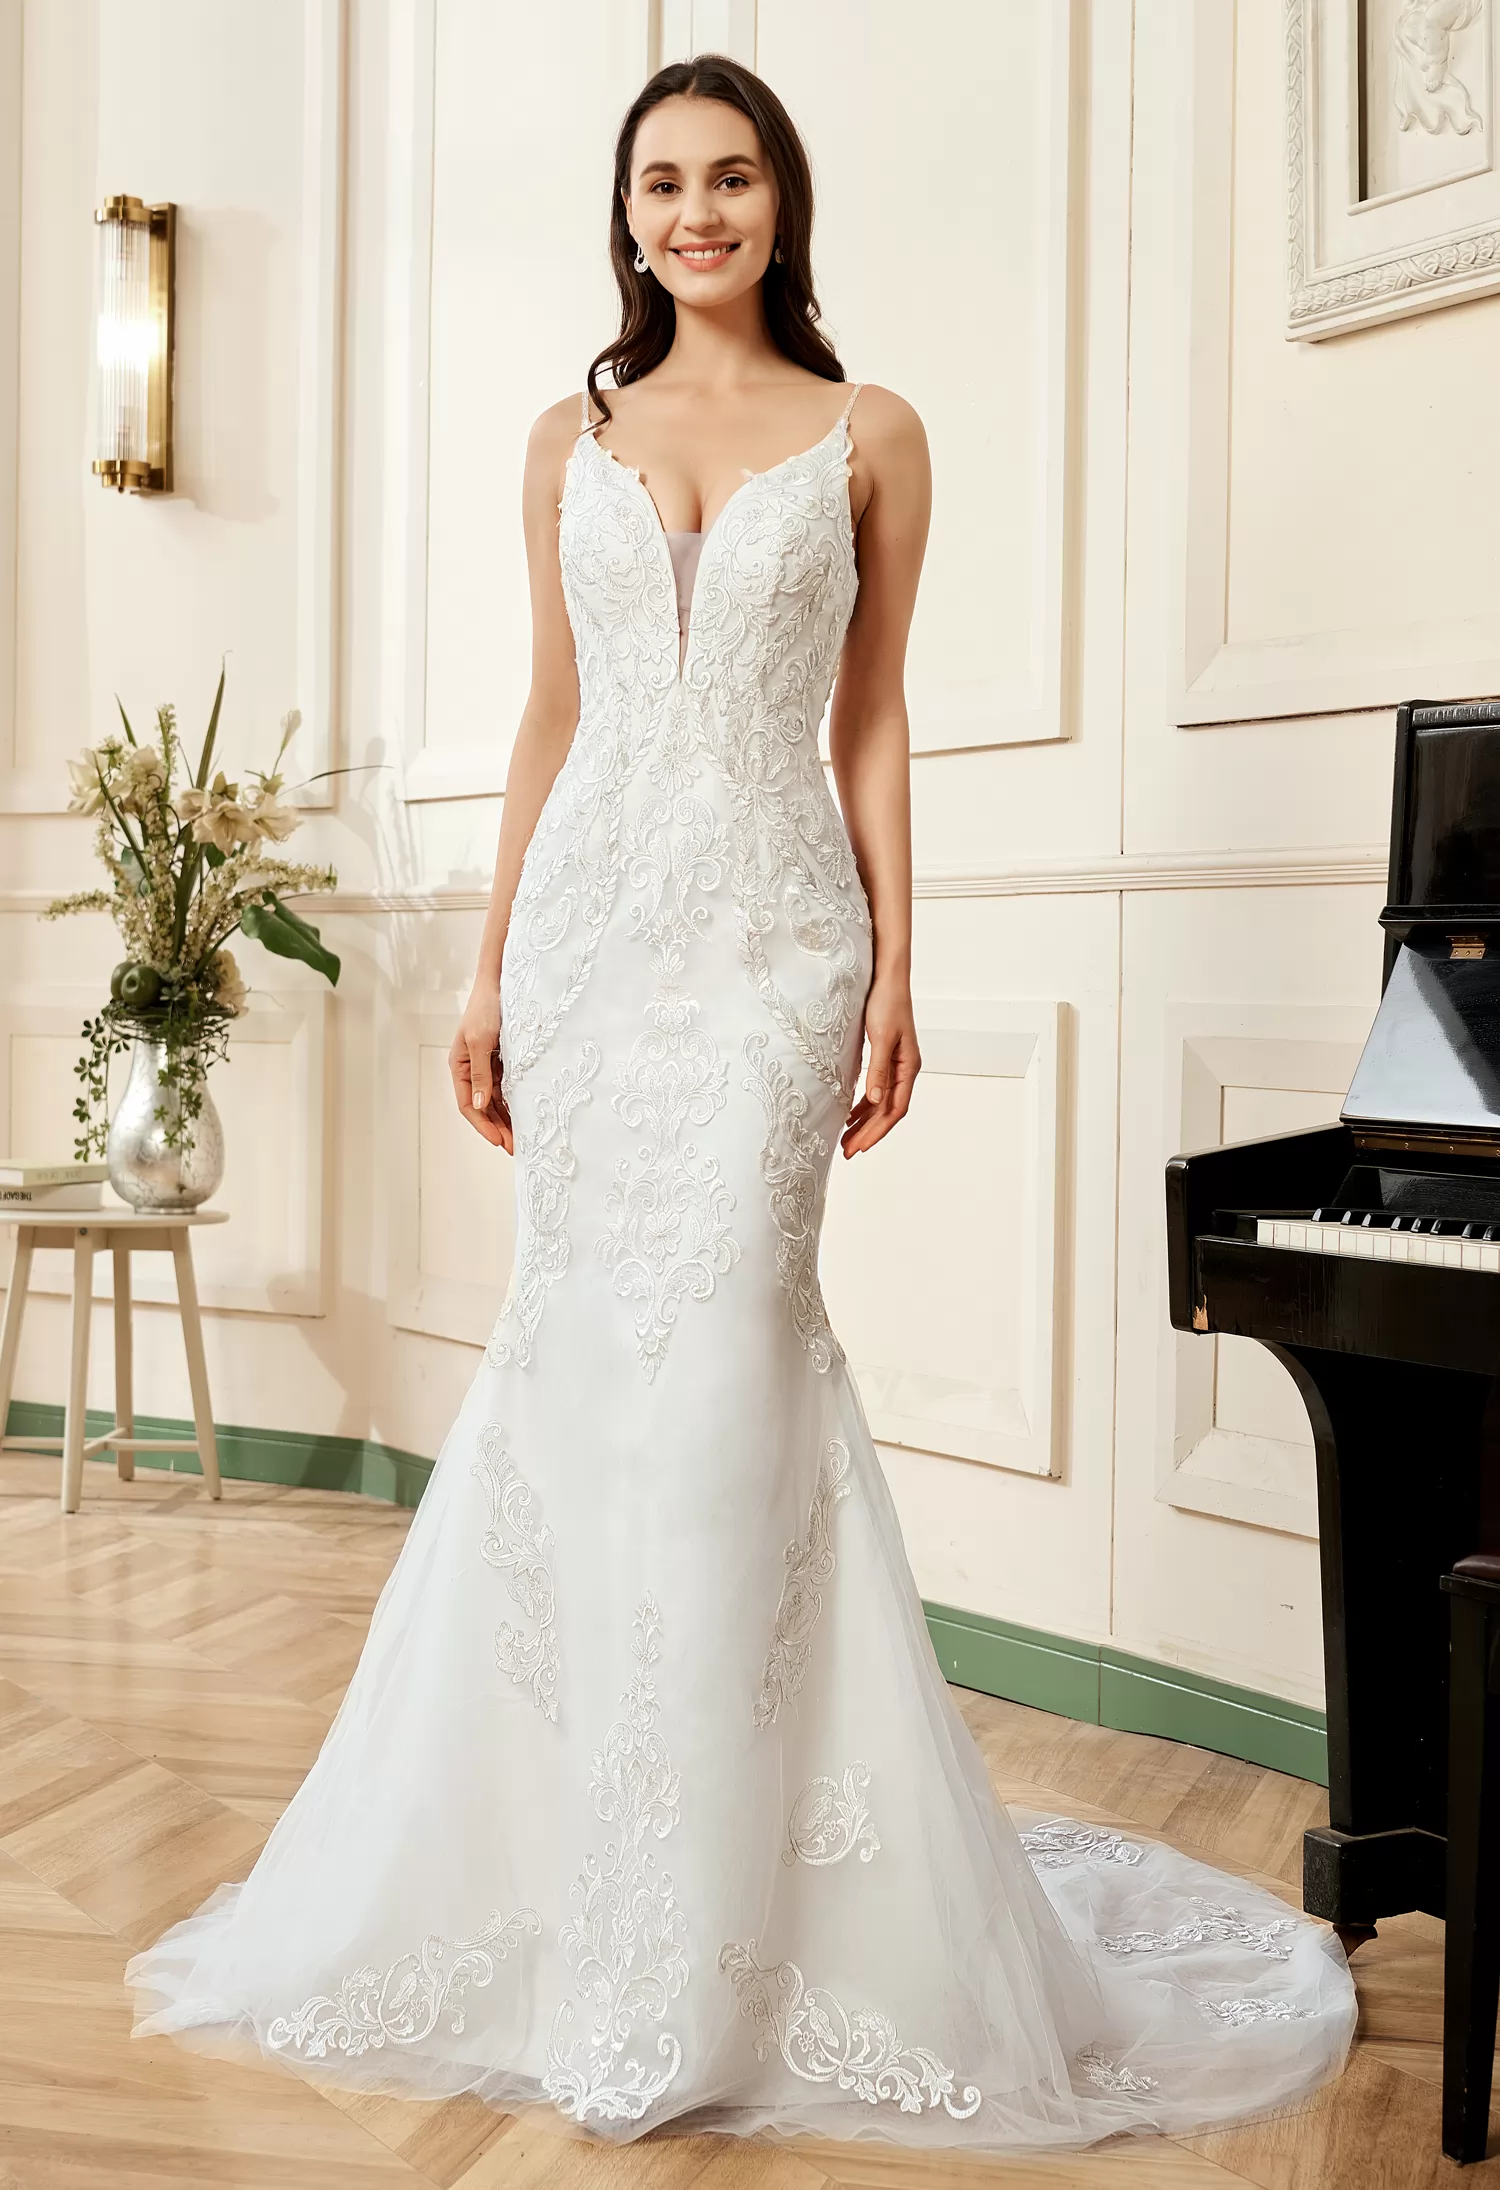 Plunging V-neck Silver Embroidered Lace Court Train Wedding Dress